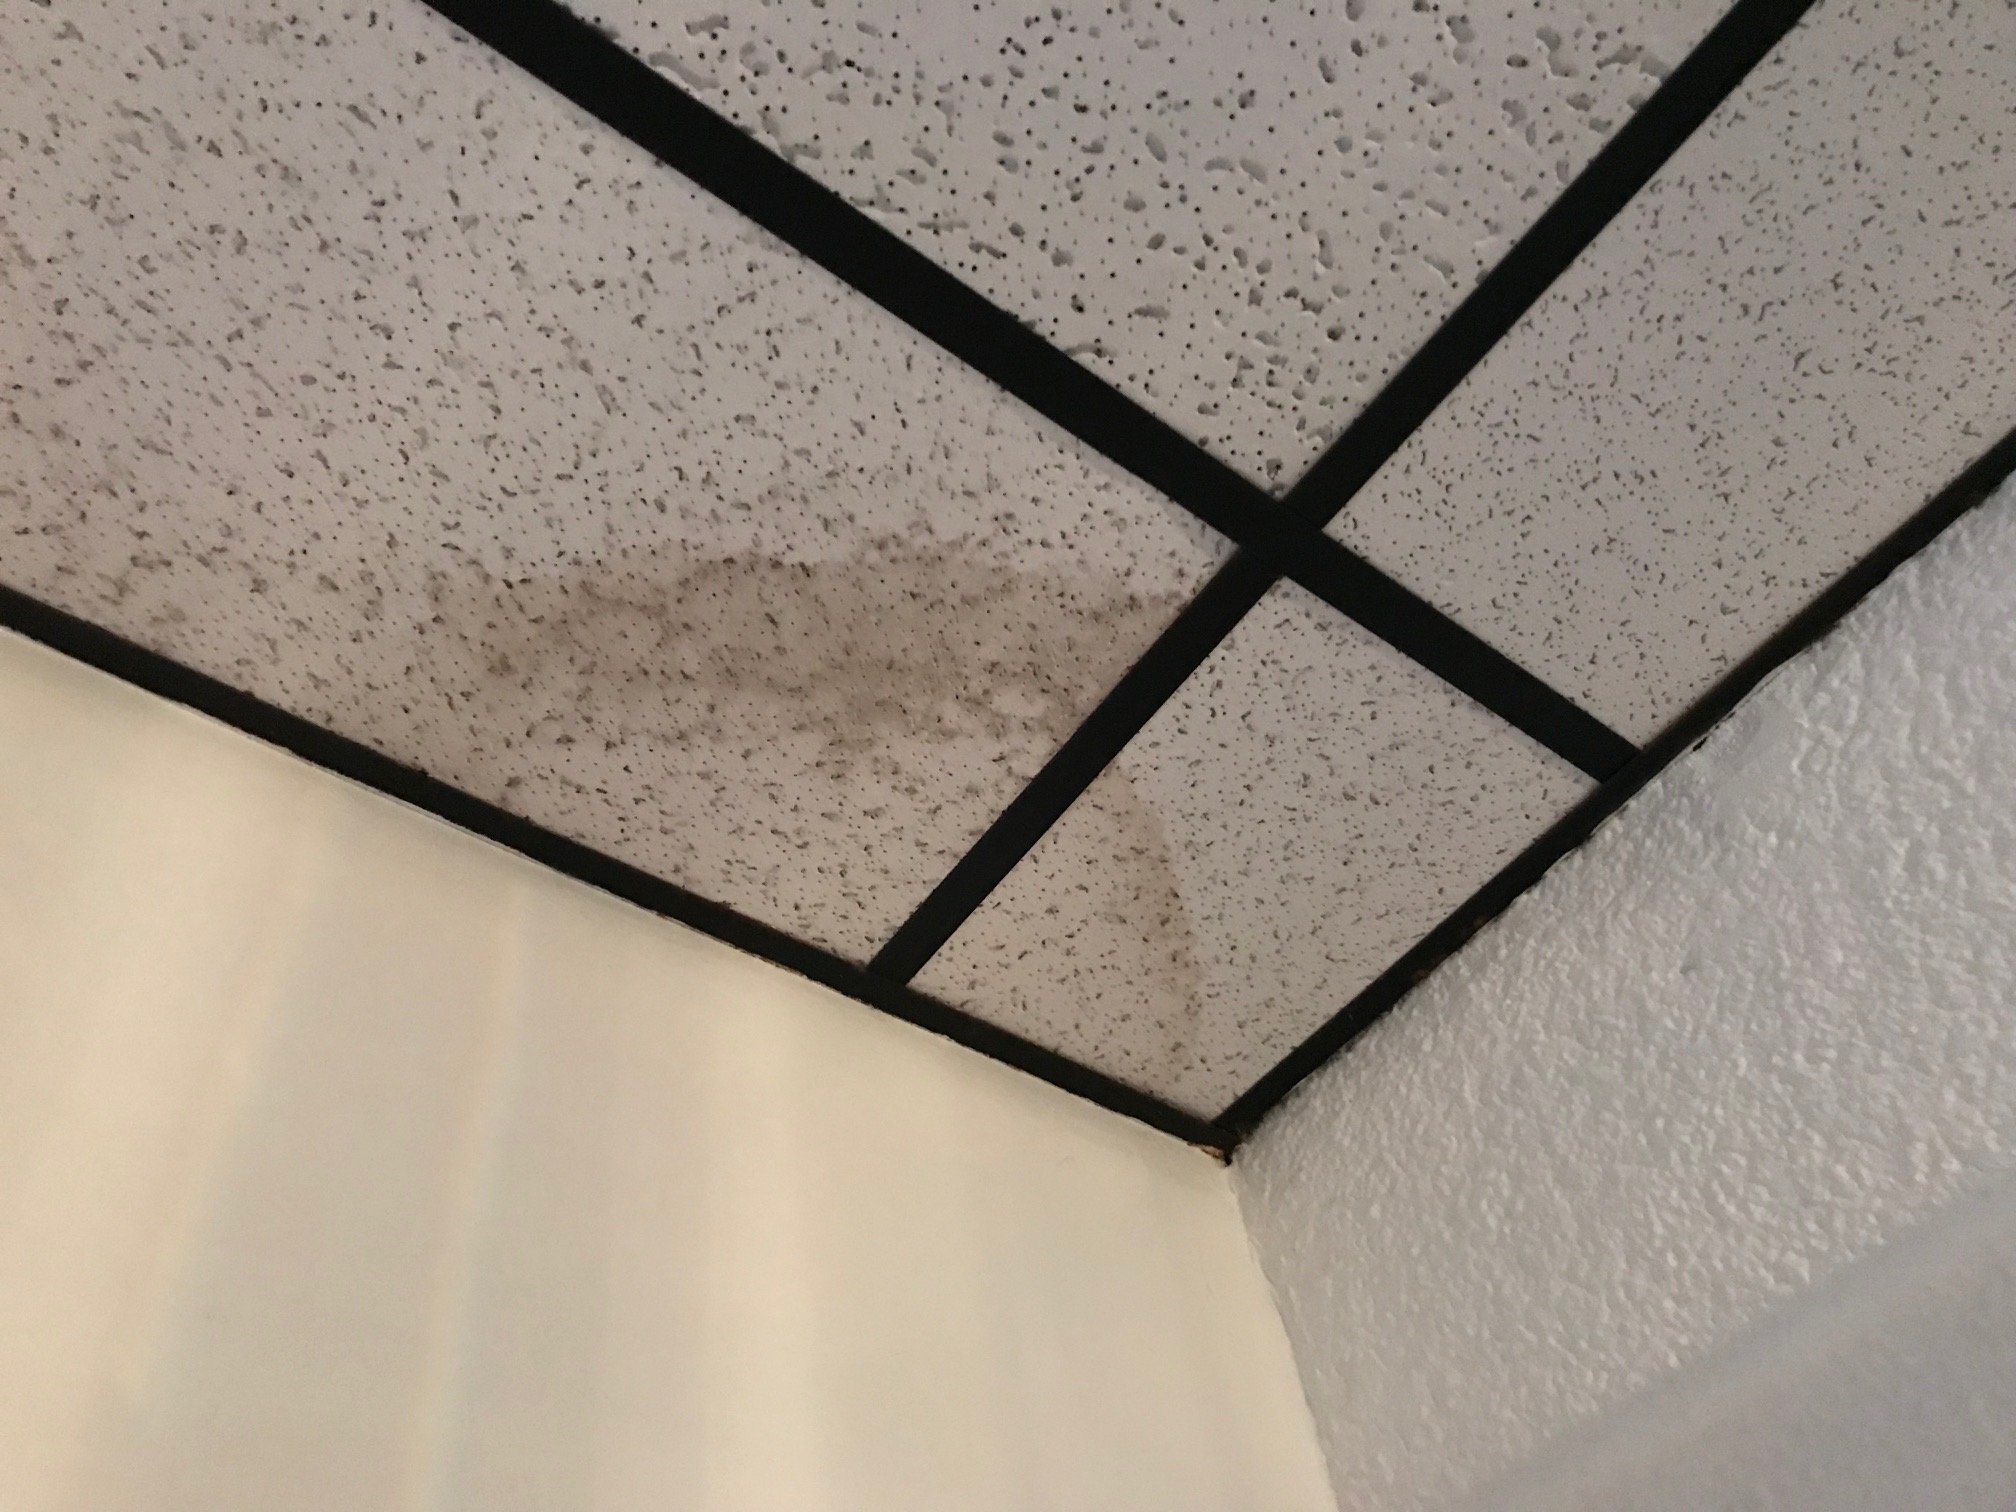 Leaks on the ceiling